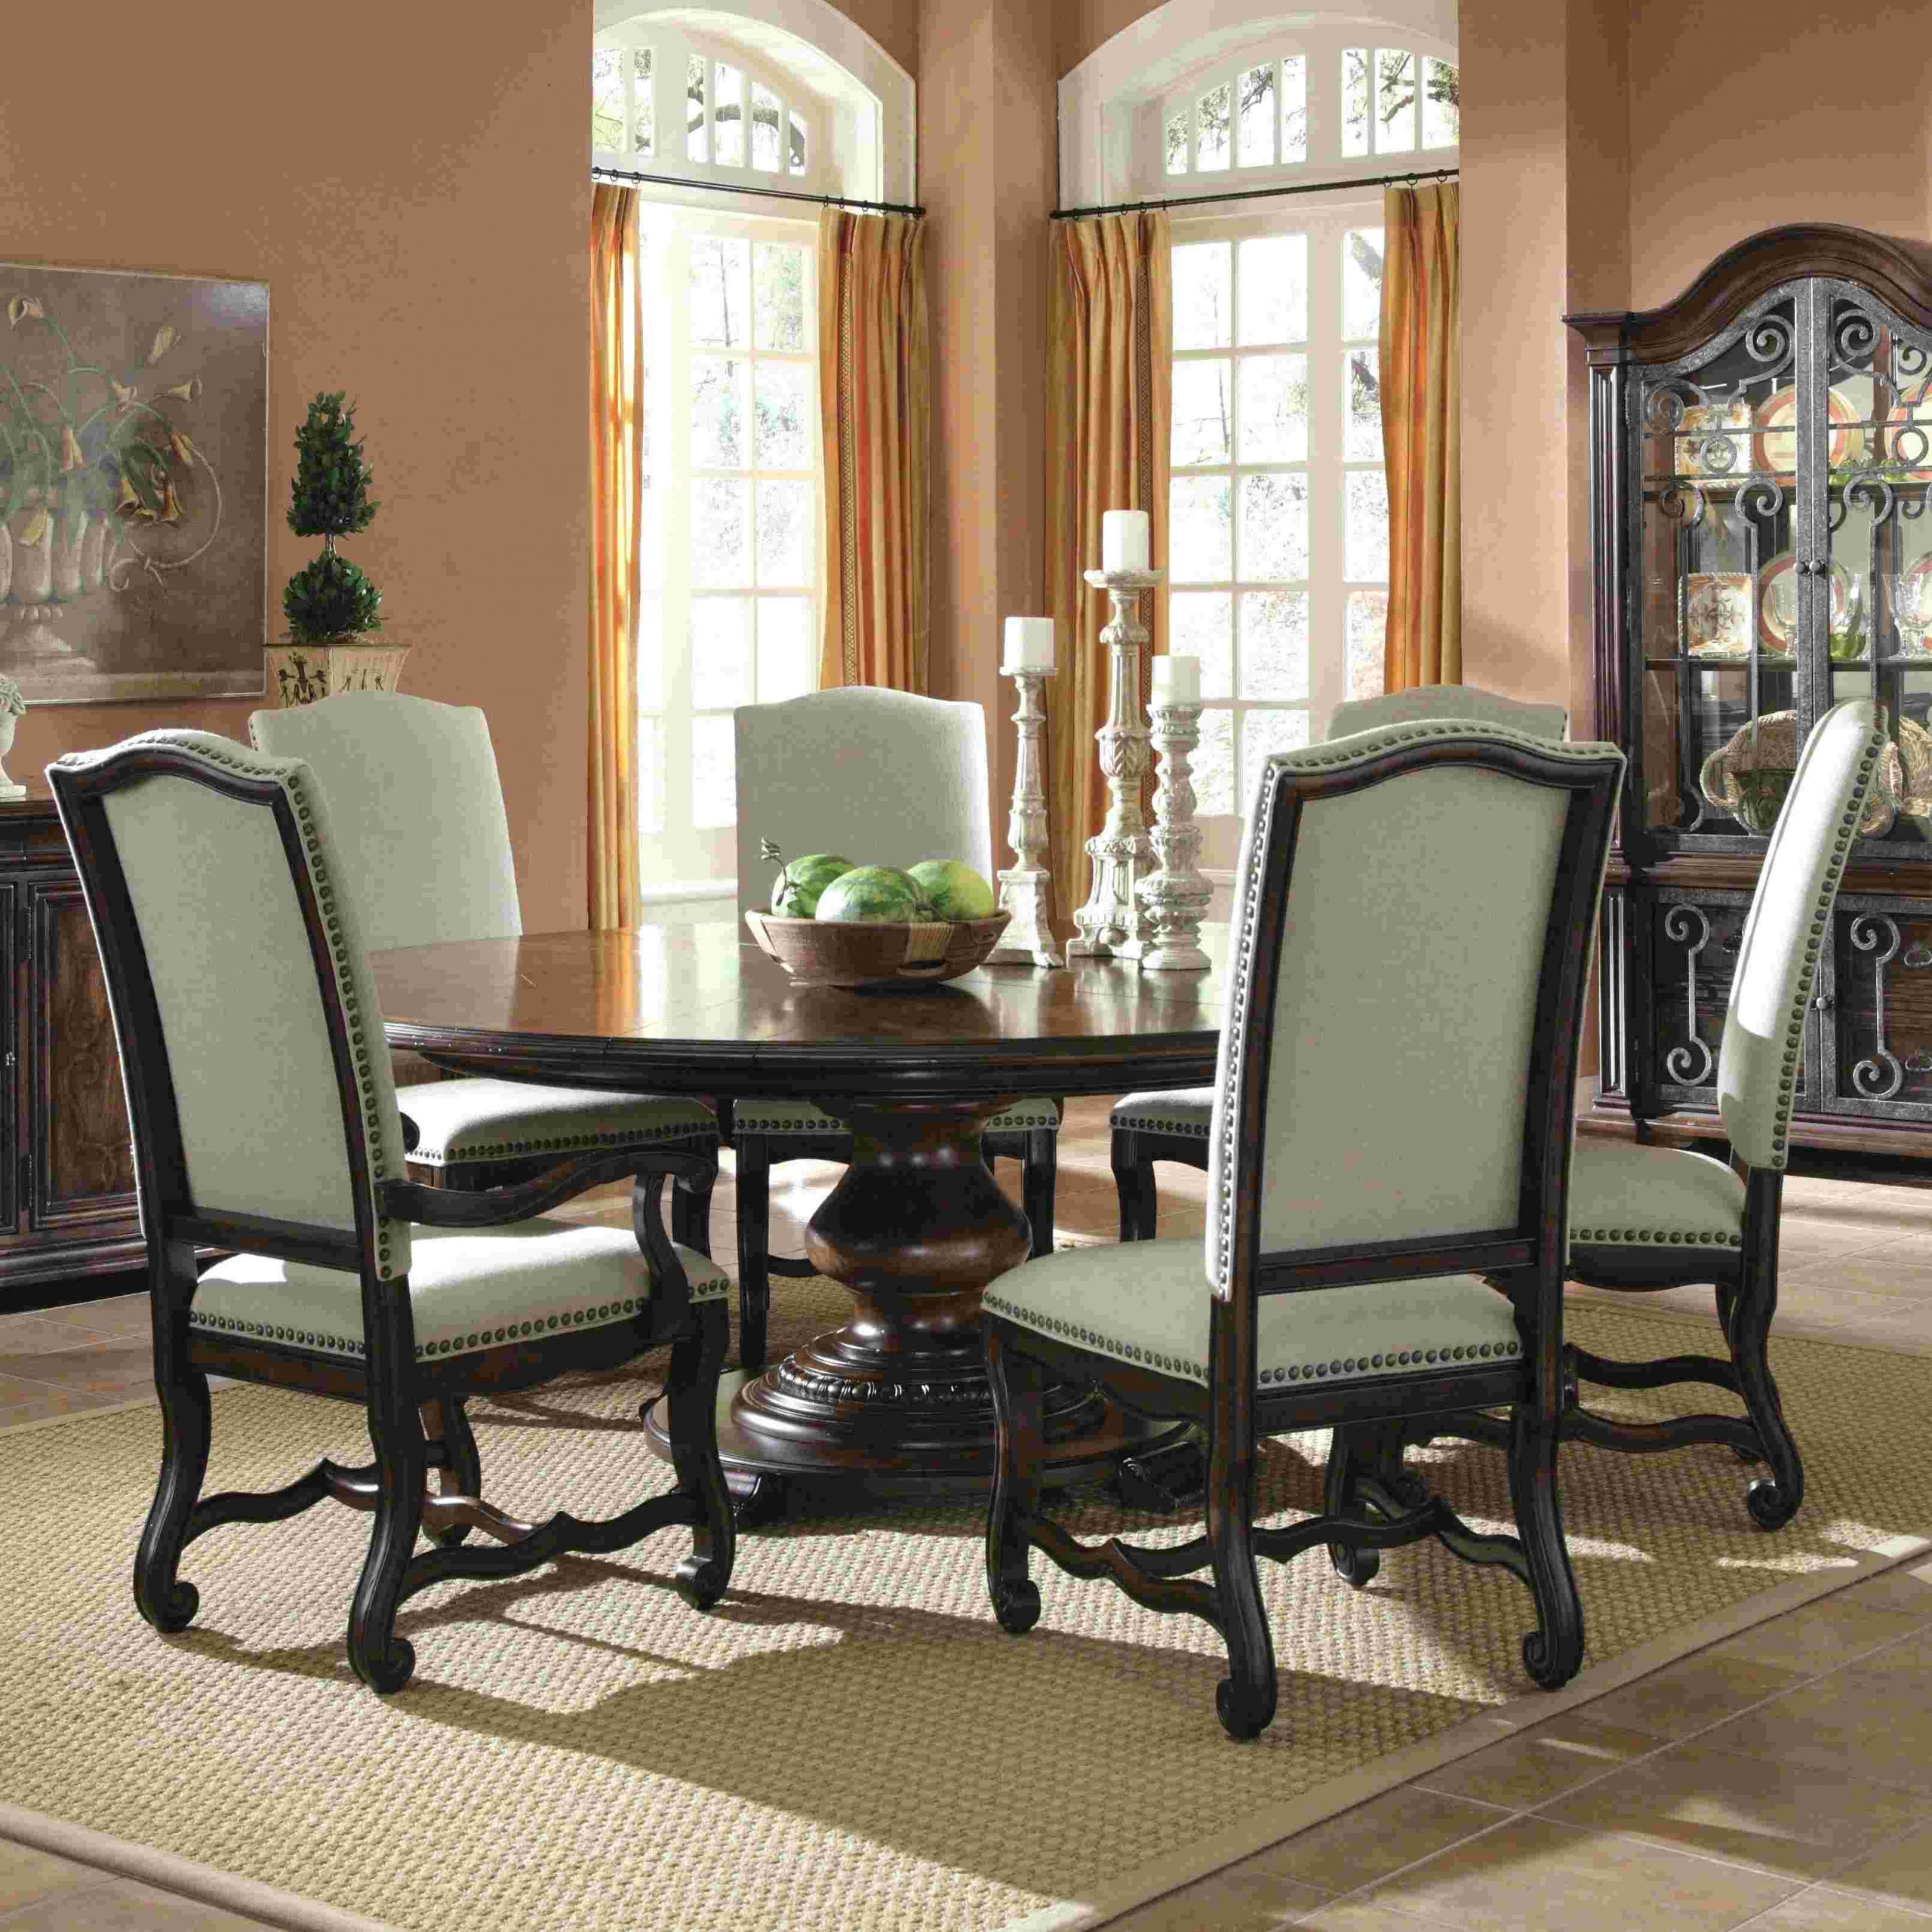 Dining Room Chairs Gumtree Cape Town Elegant Dining Room pertaining to size 3221 X 3221